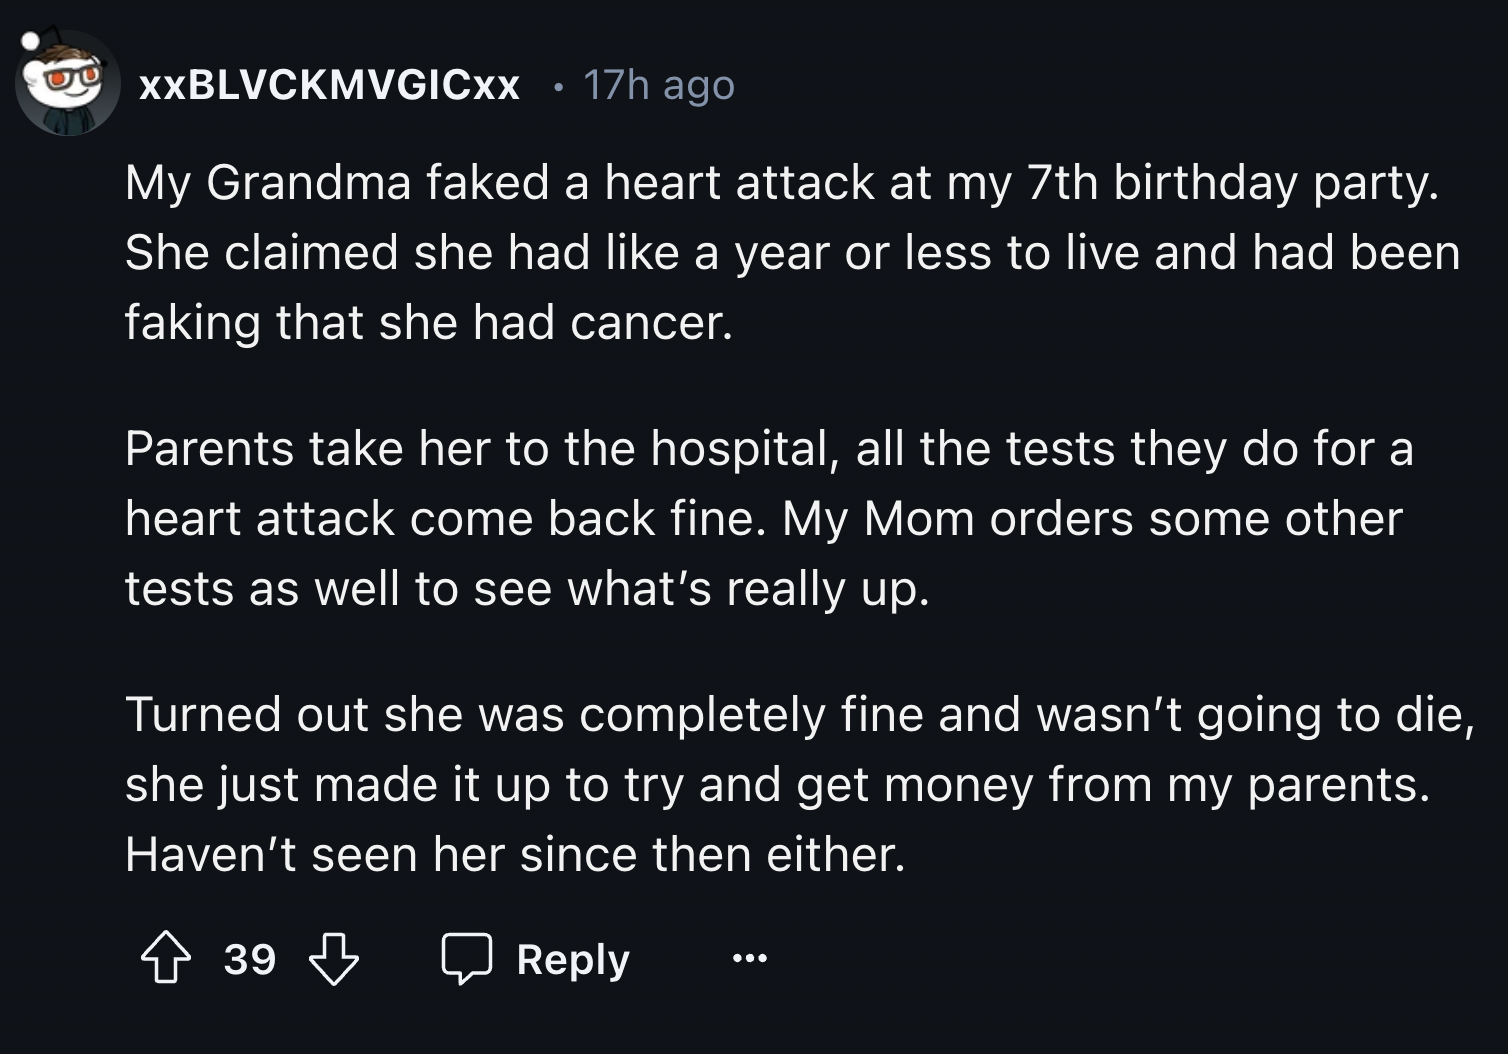 screenshot - Xxblvckmvgicxx 17h ago My Grandma faked a heart attack at my 7th birthday party. She claimed she had a year or less to live and had been faking that she had cancer. Parents take her to the hospital, all the tests they do for a heart attack co